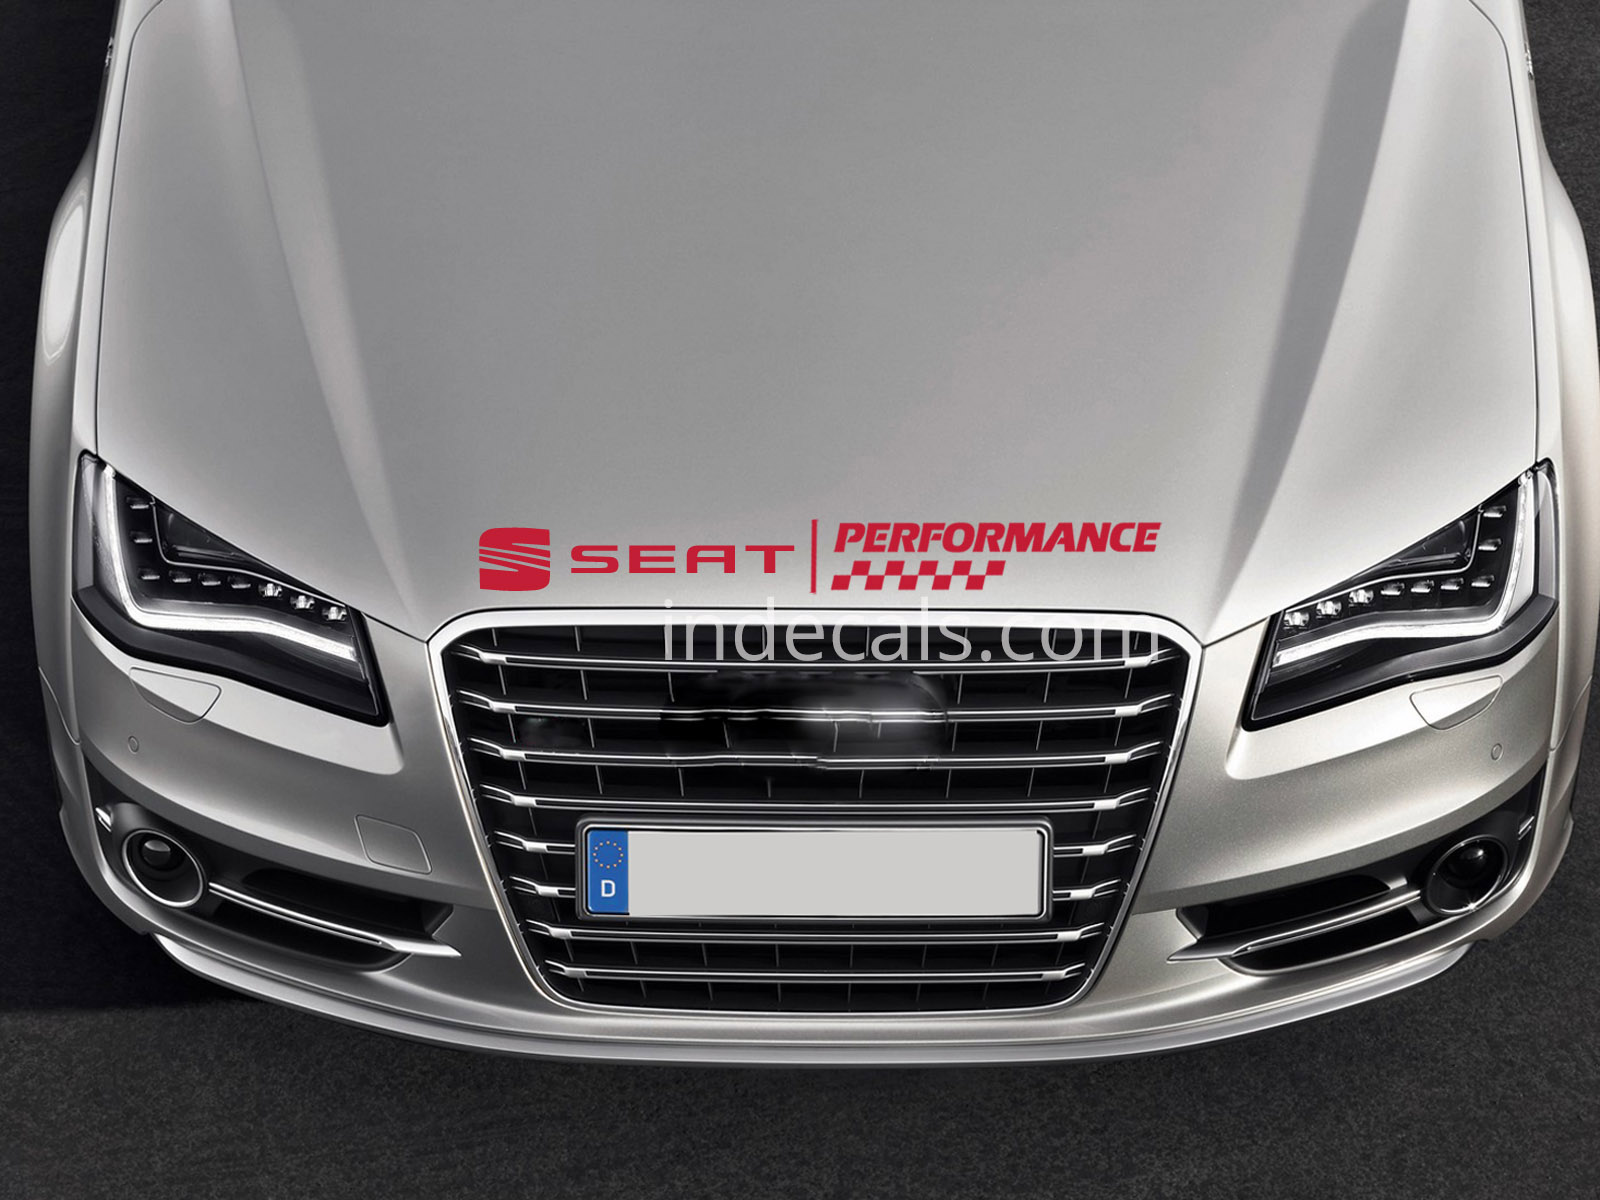 1 x Seat Performance Sticker for Bonnet - Red